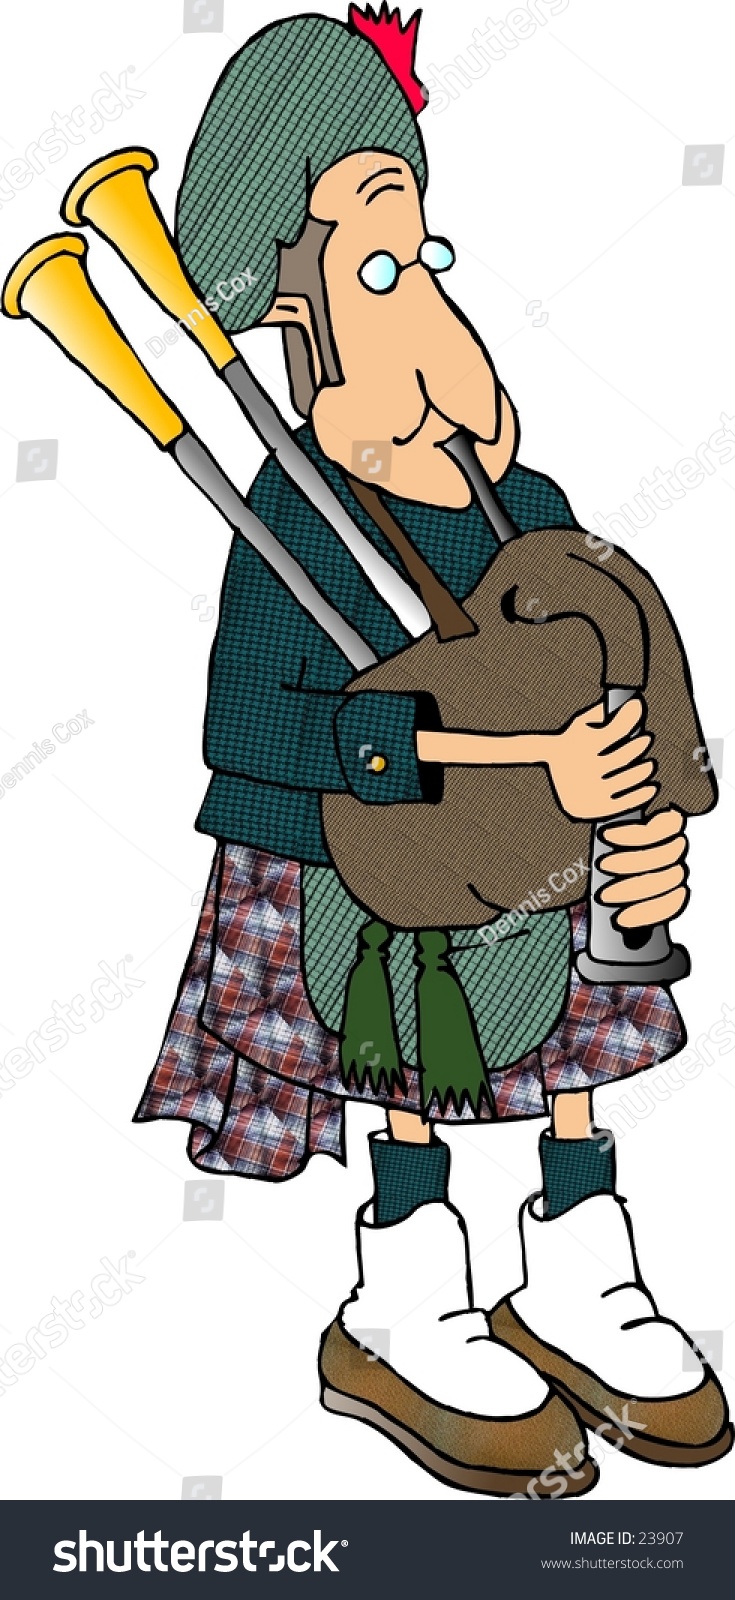 clipart bagpipes - photo #39